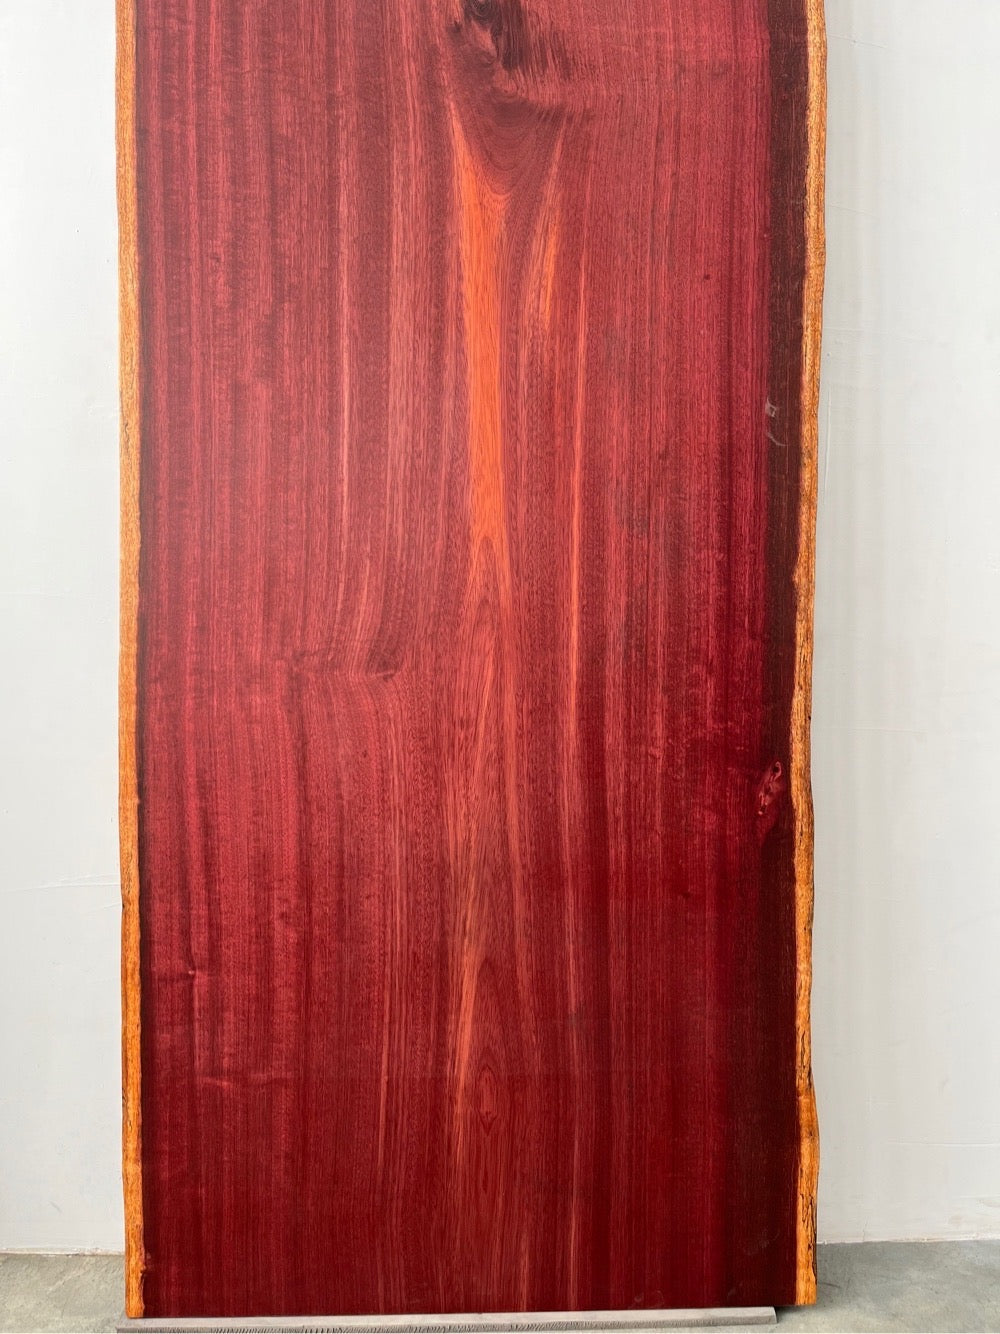 Live edge one solid purple heart wood slab For sale, purpleheart wood table, purpleheart wood slab